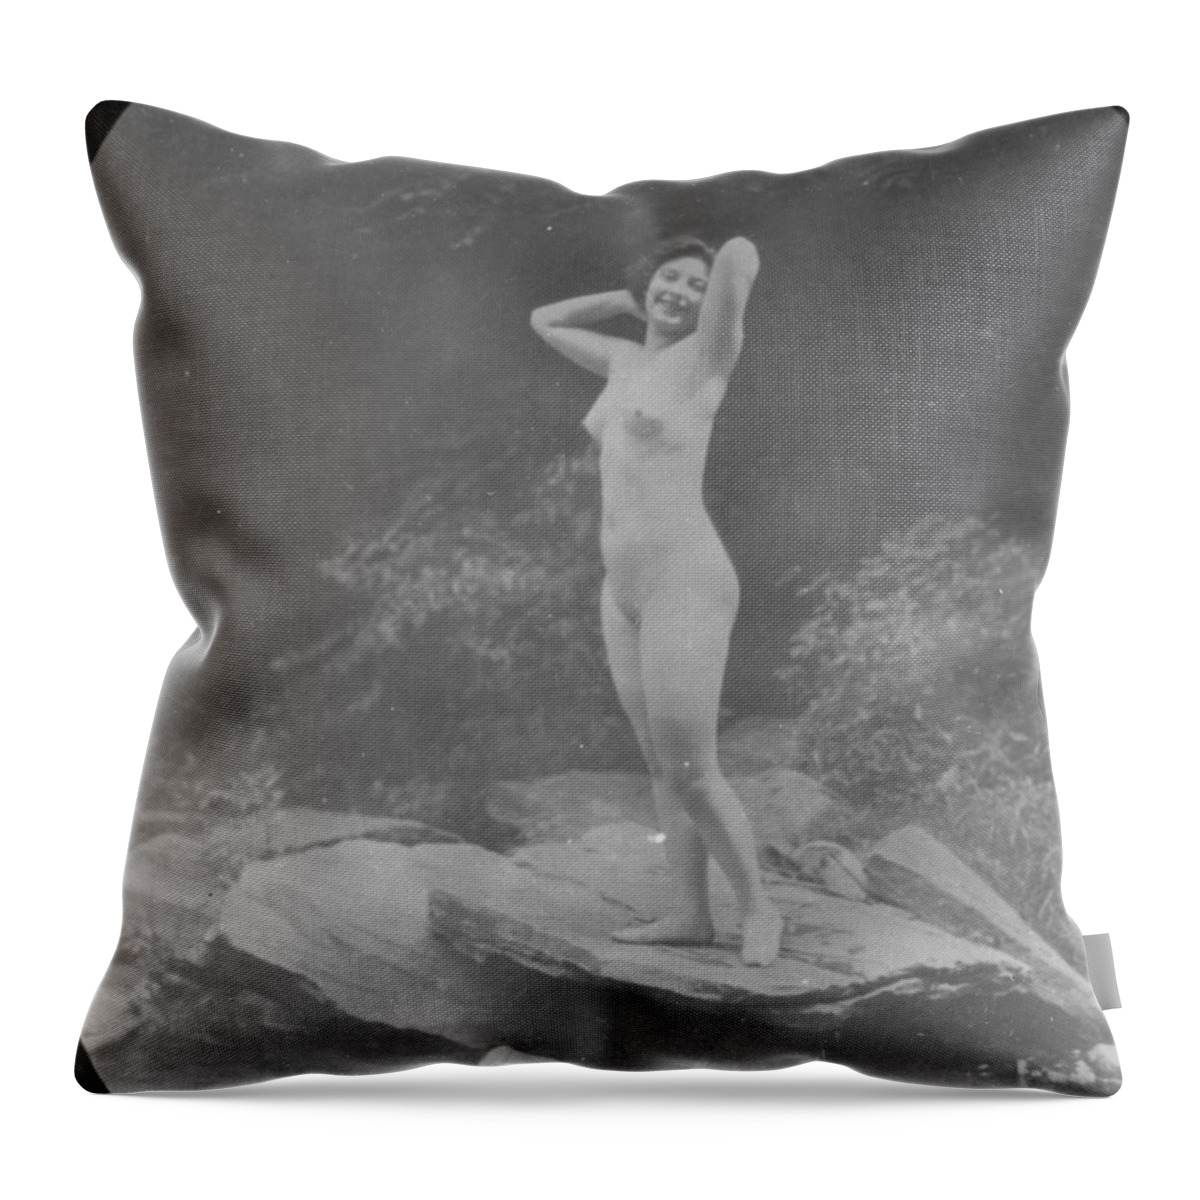 19th Century Throw Pillow featuring the photograph Nude Outdoors, 19th Ct by Granger